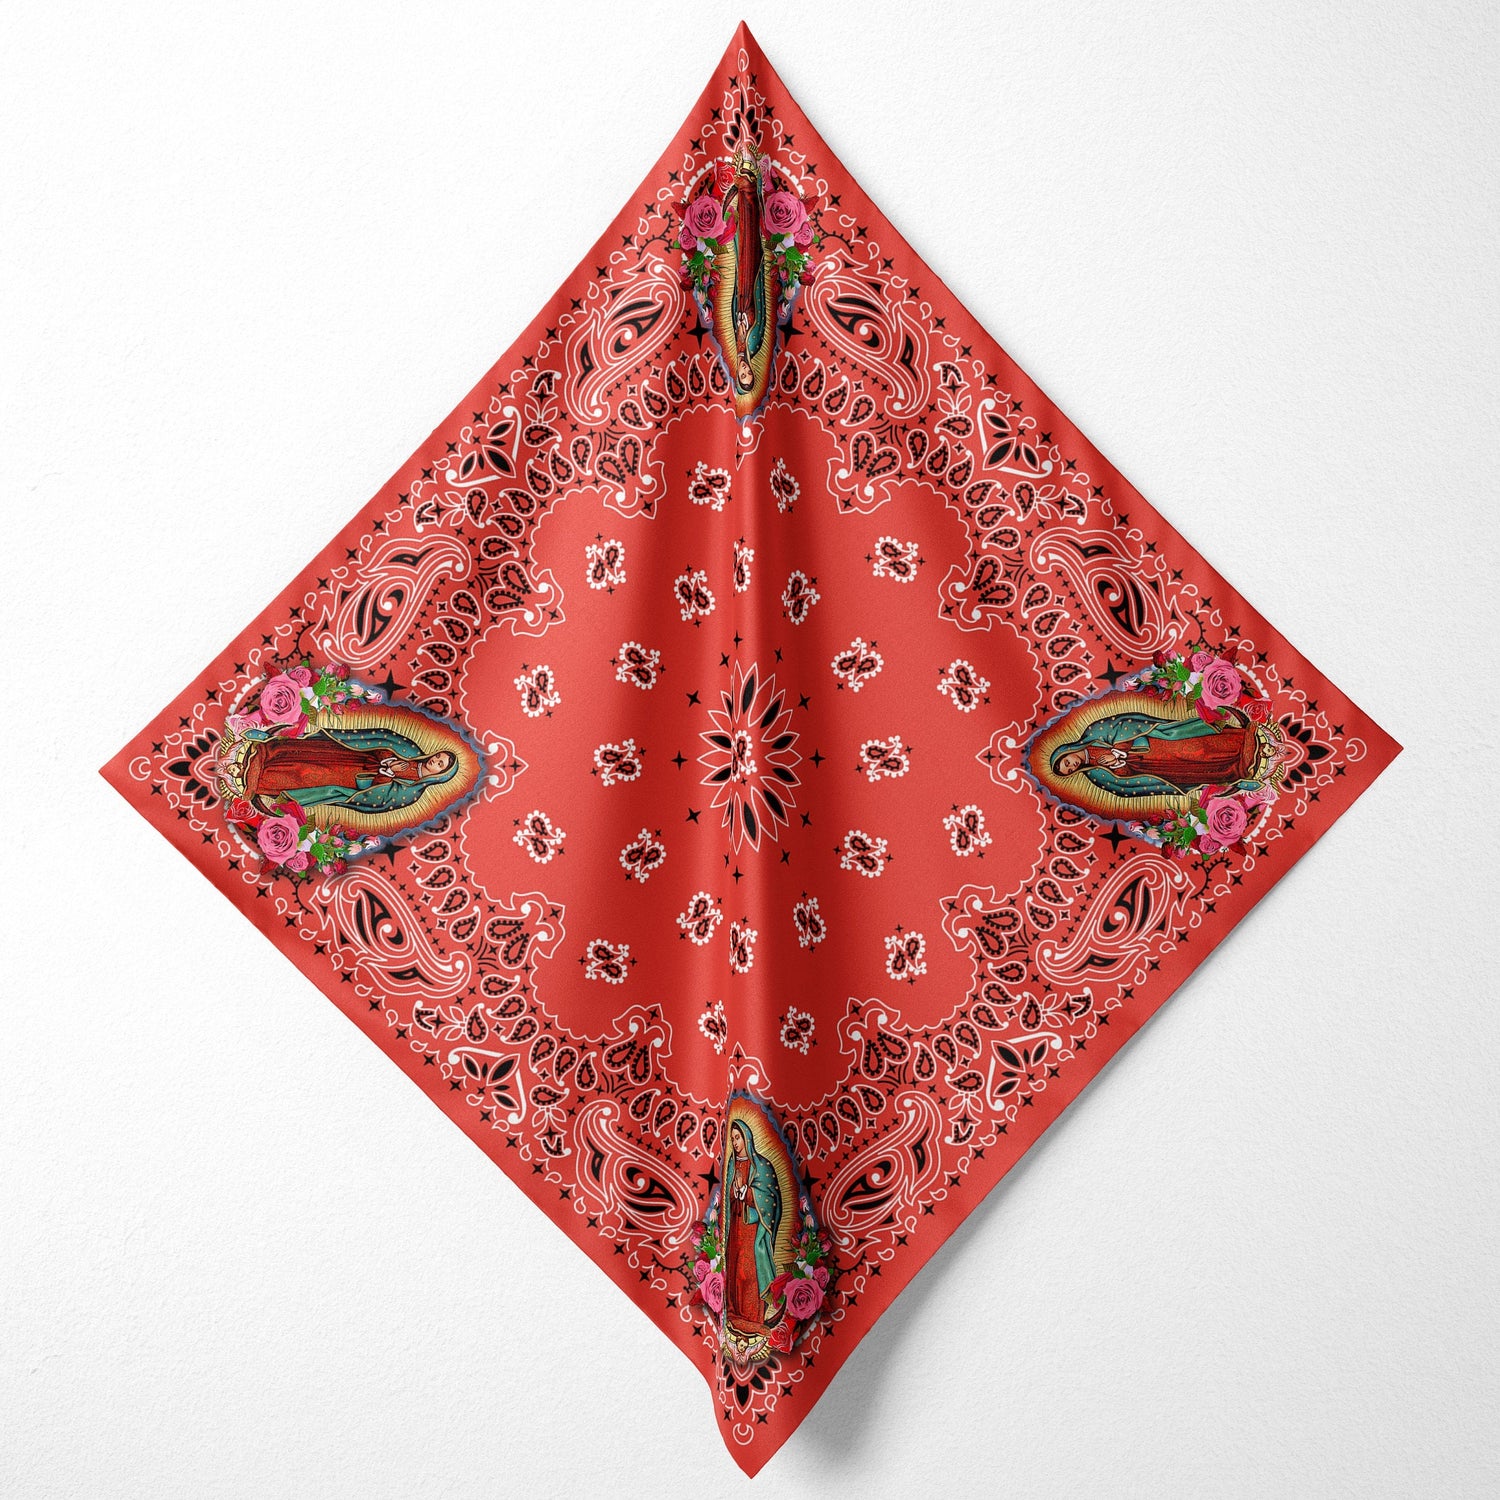 Virgin Mary, Our Lady of Guadalupe Paisley Red Bandana, Head Wrap, Altar Cloth or Scarf